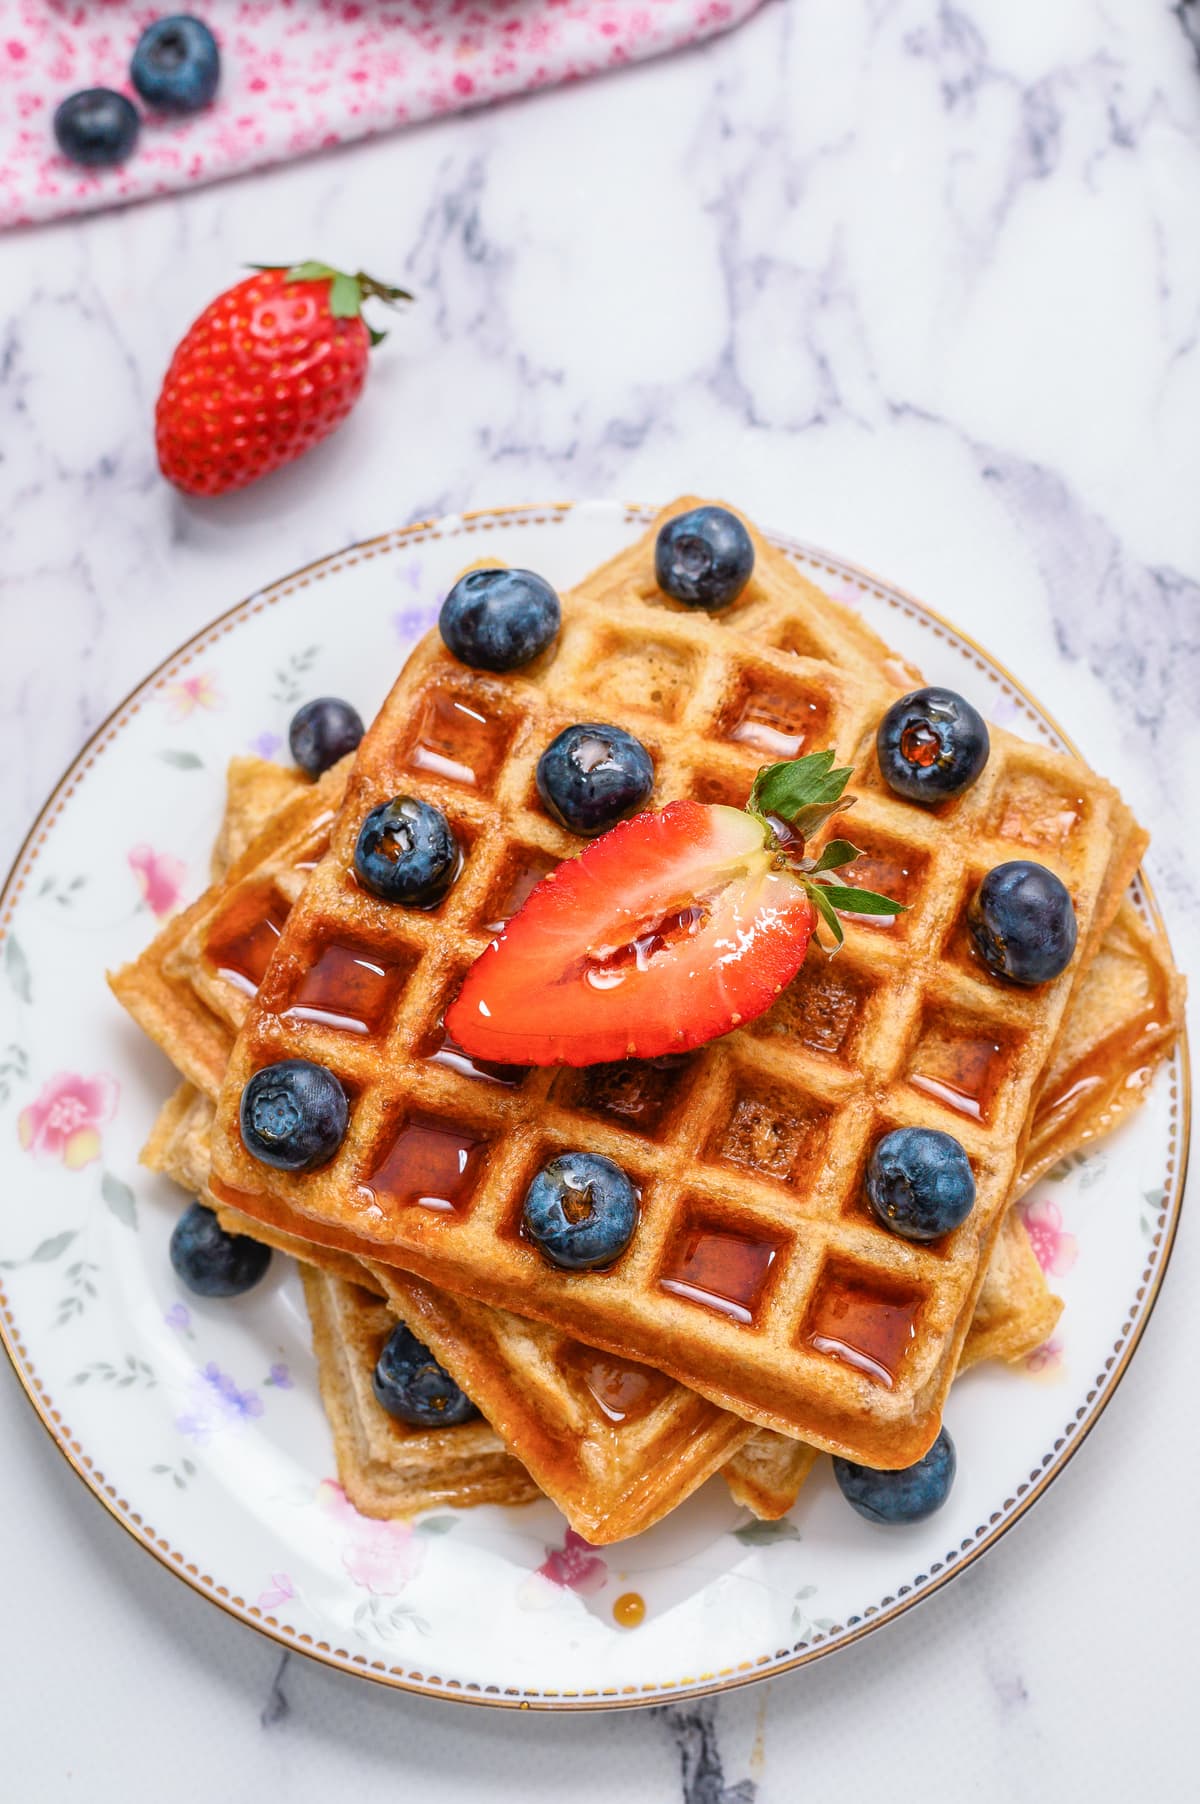 Whole Wheat Waffles recipe by Kristen Chidsey